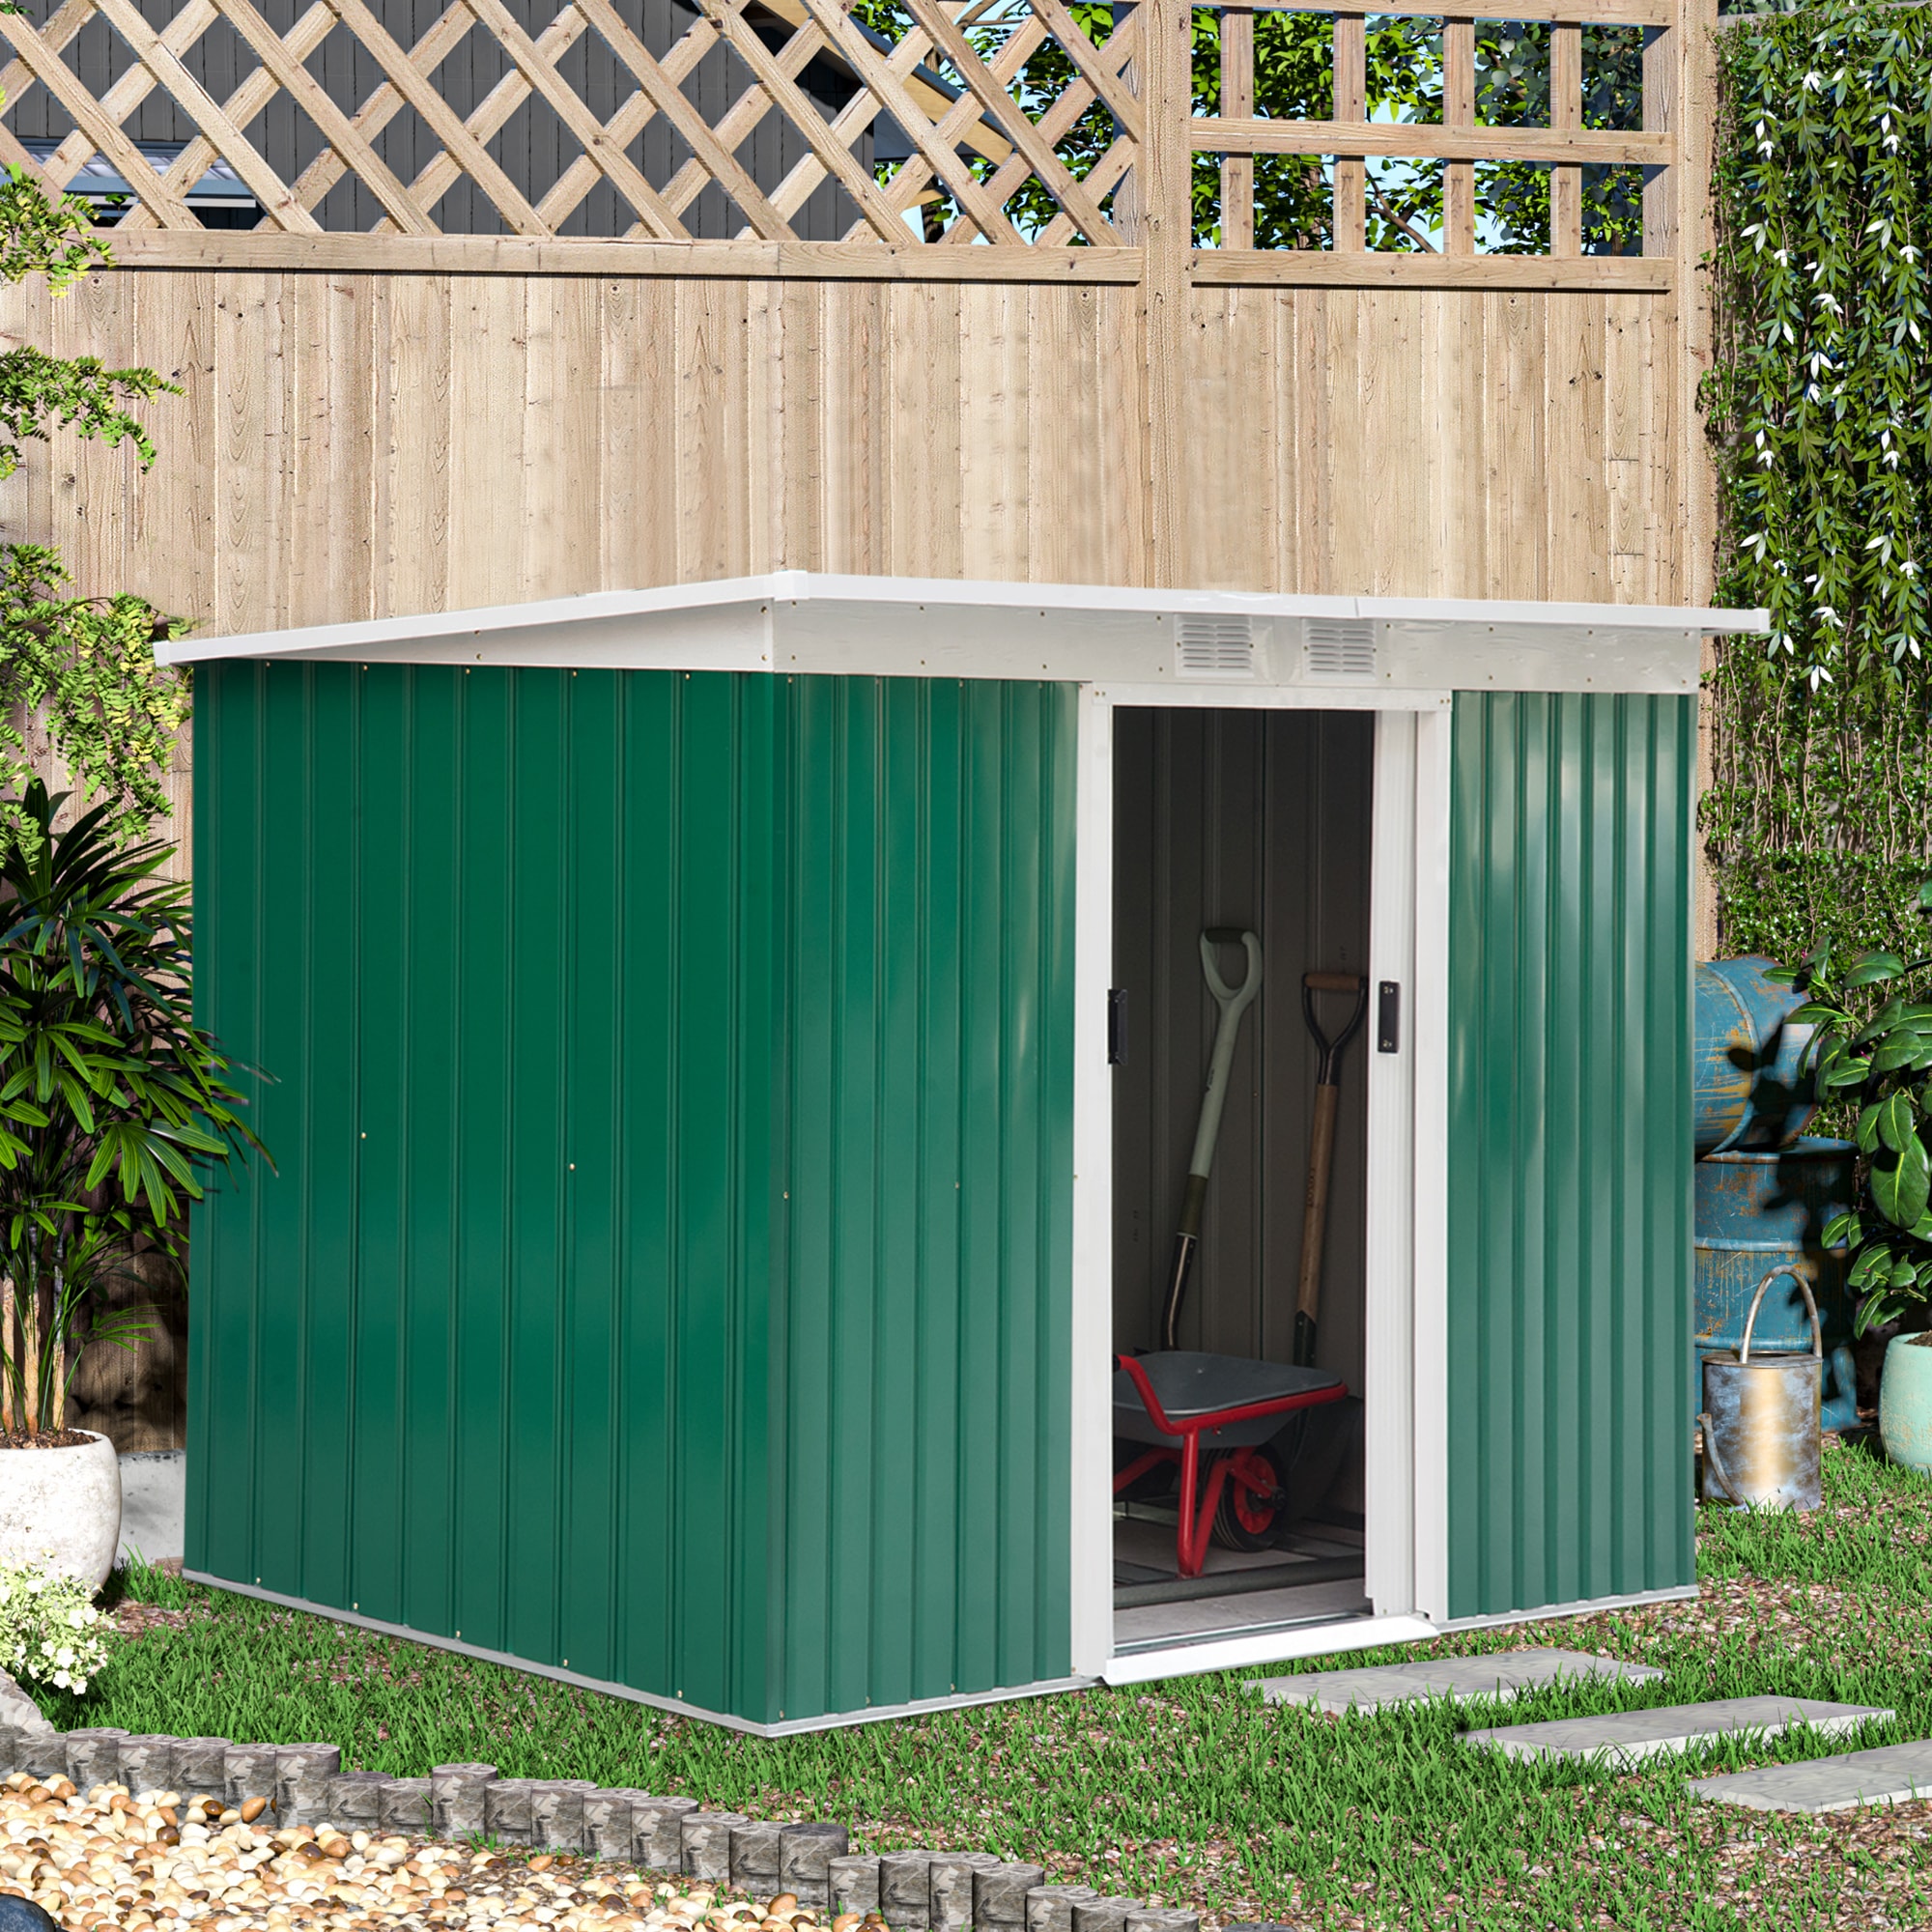 Green & White Godyluck 9 x 4 Outdoor Metal Garden Storage Shed with Double Sliding Doors and 2 Vents for Lighting and Airflow